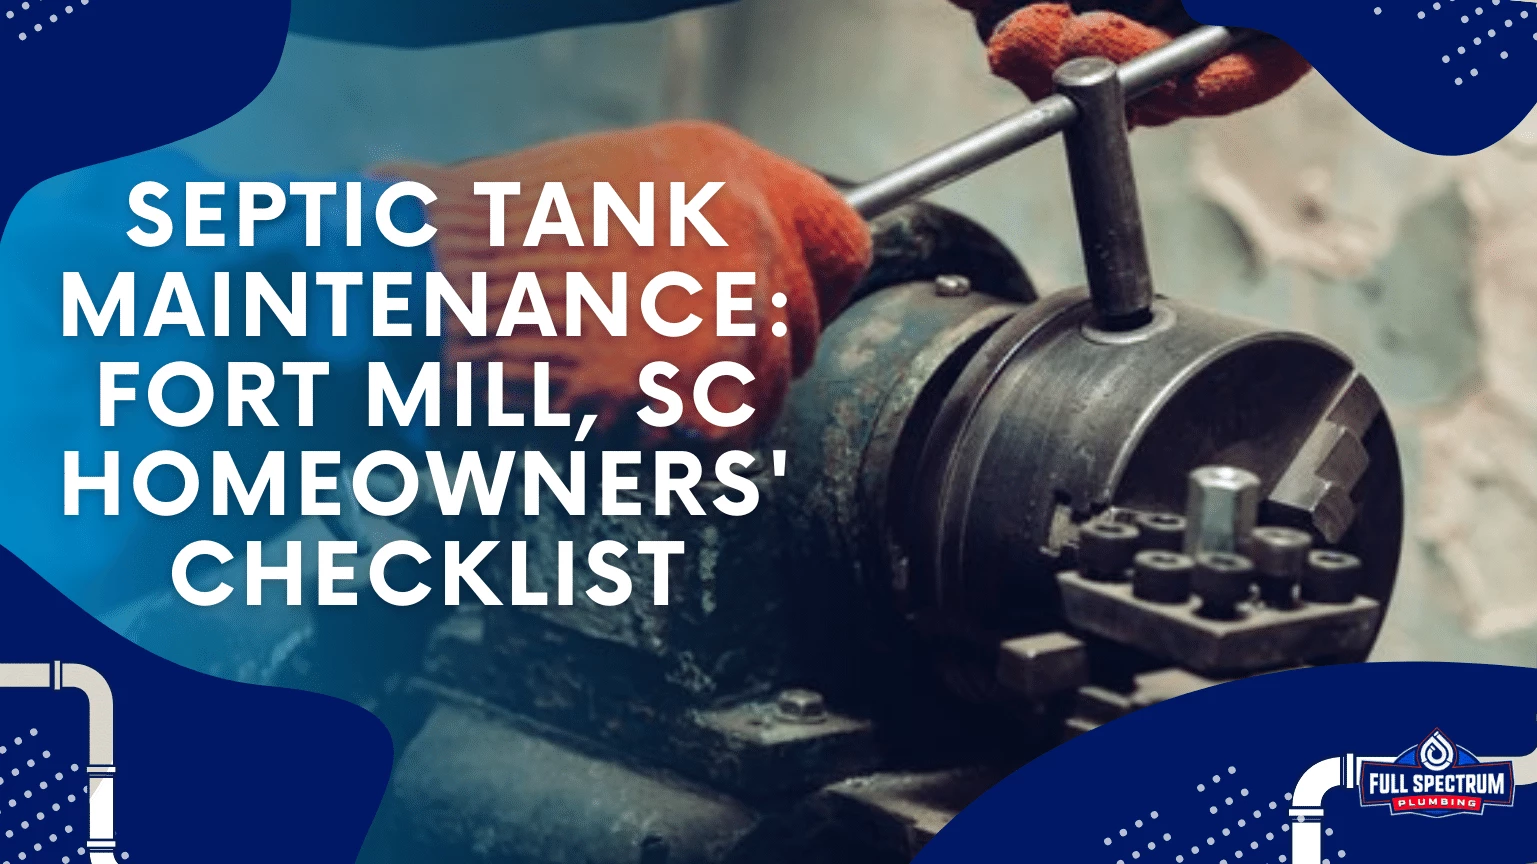 Septic Tank Maintenance Fort Mill, SC Homeowners' Checklist